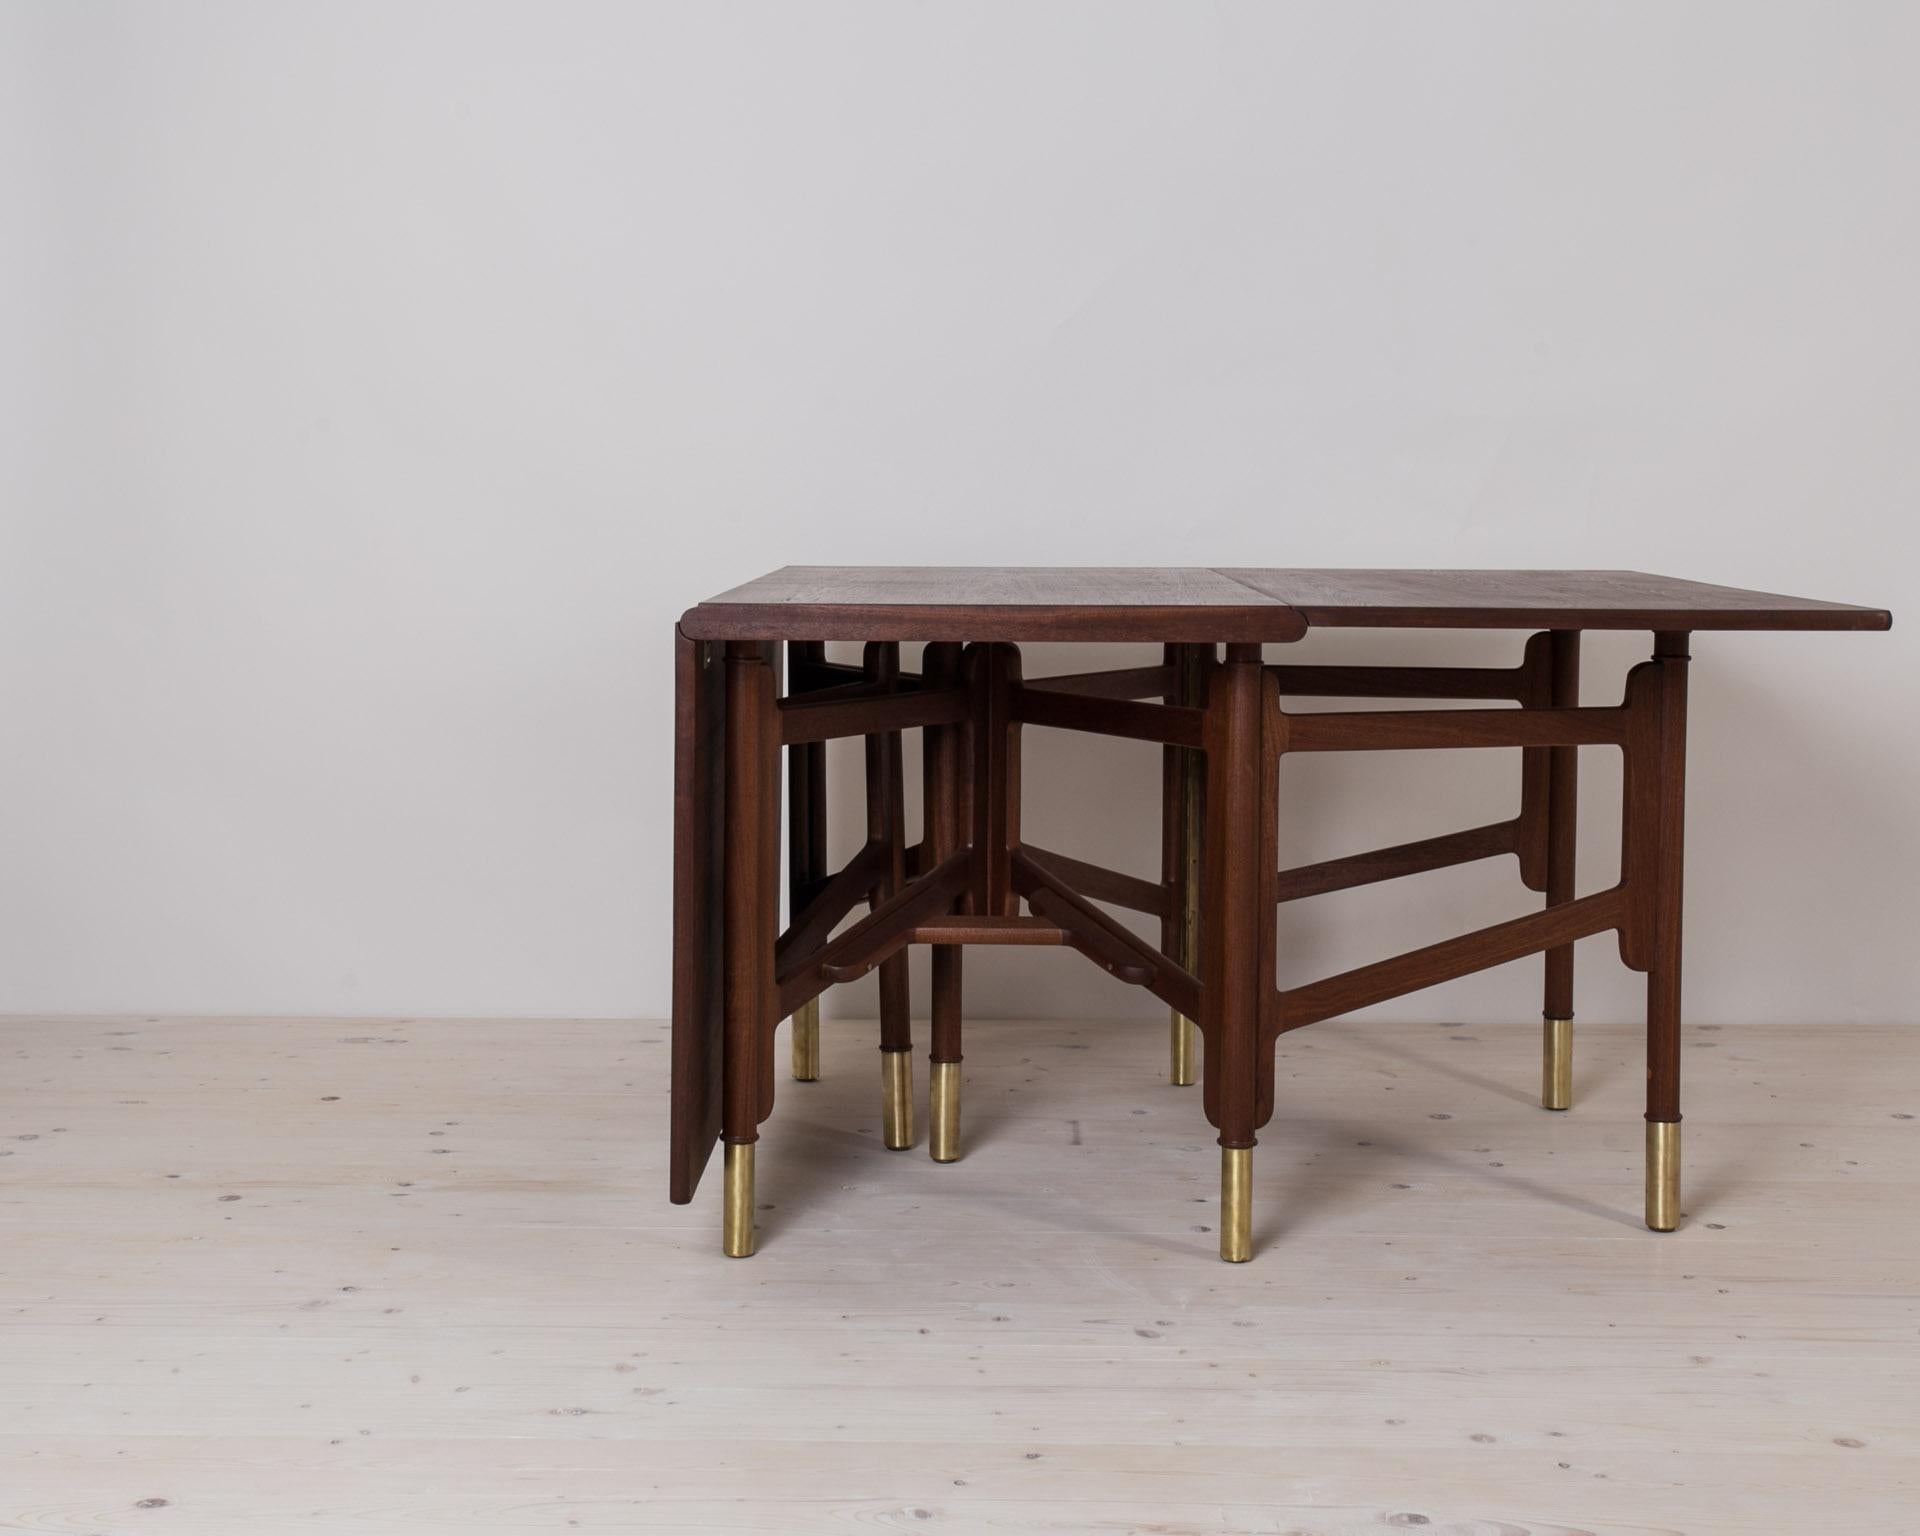 Midcentury Dining Table, Teak Wood, Brass Elements, Norway, 1950s In Good Condition For Sale In Wrocław, Poland